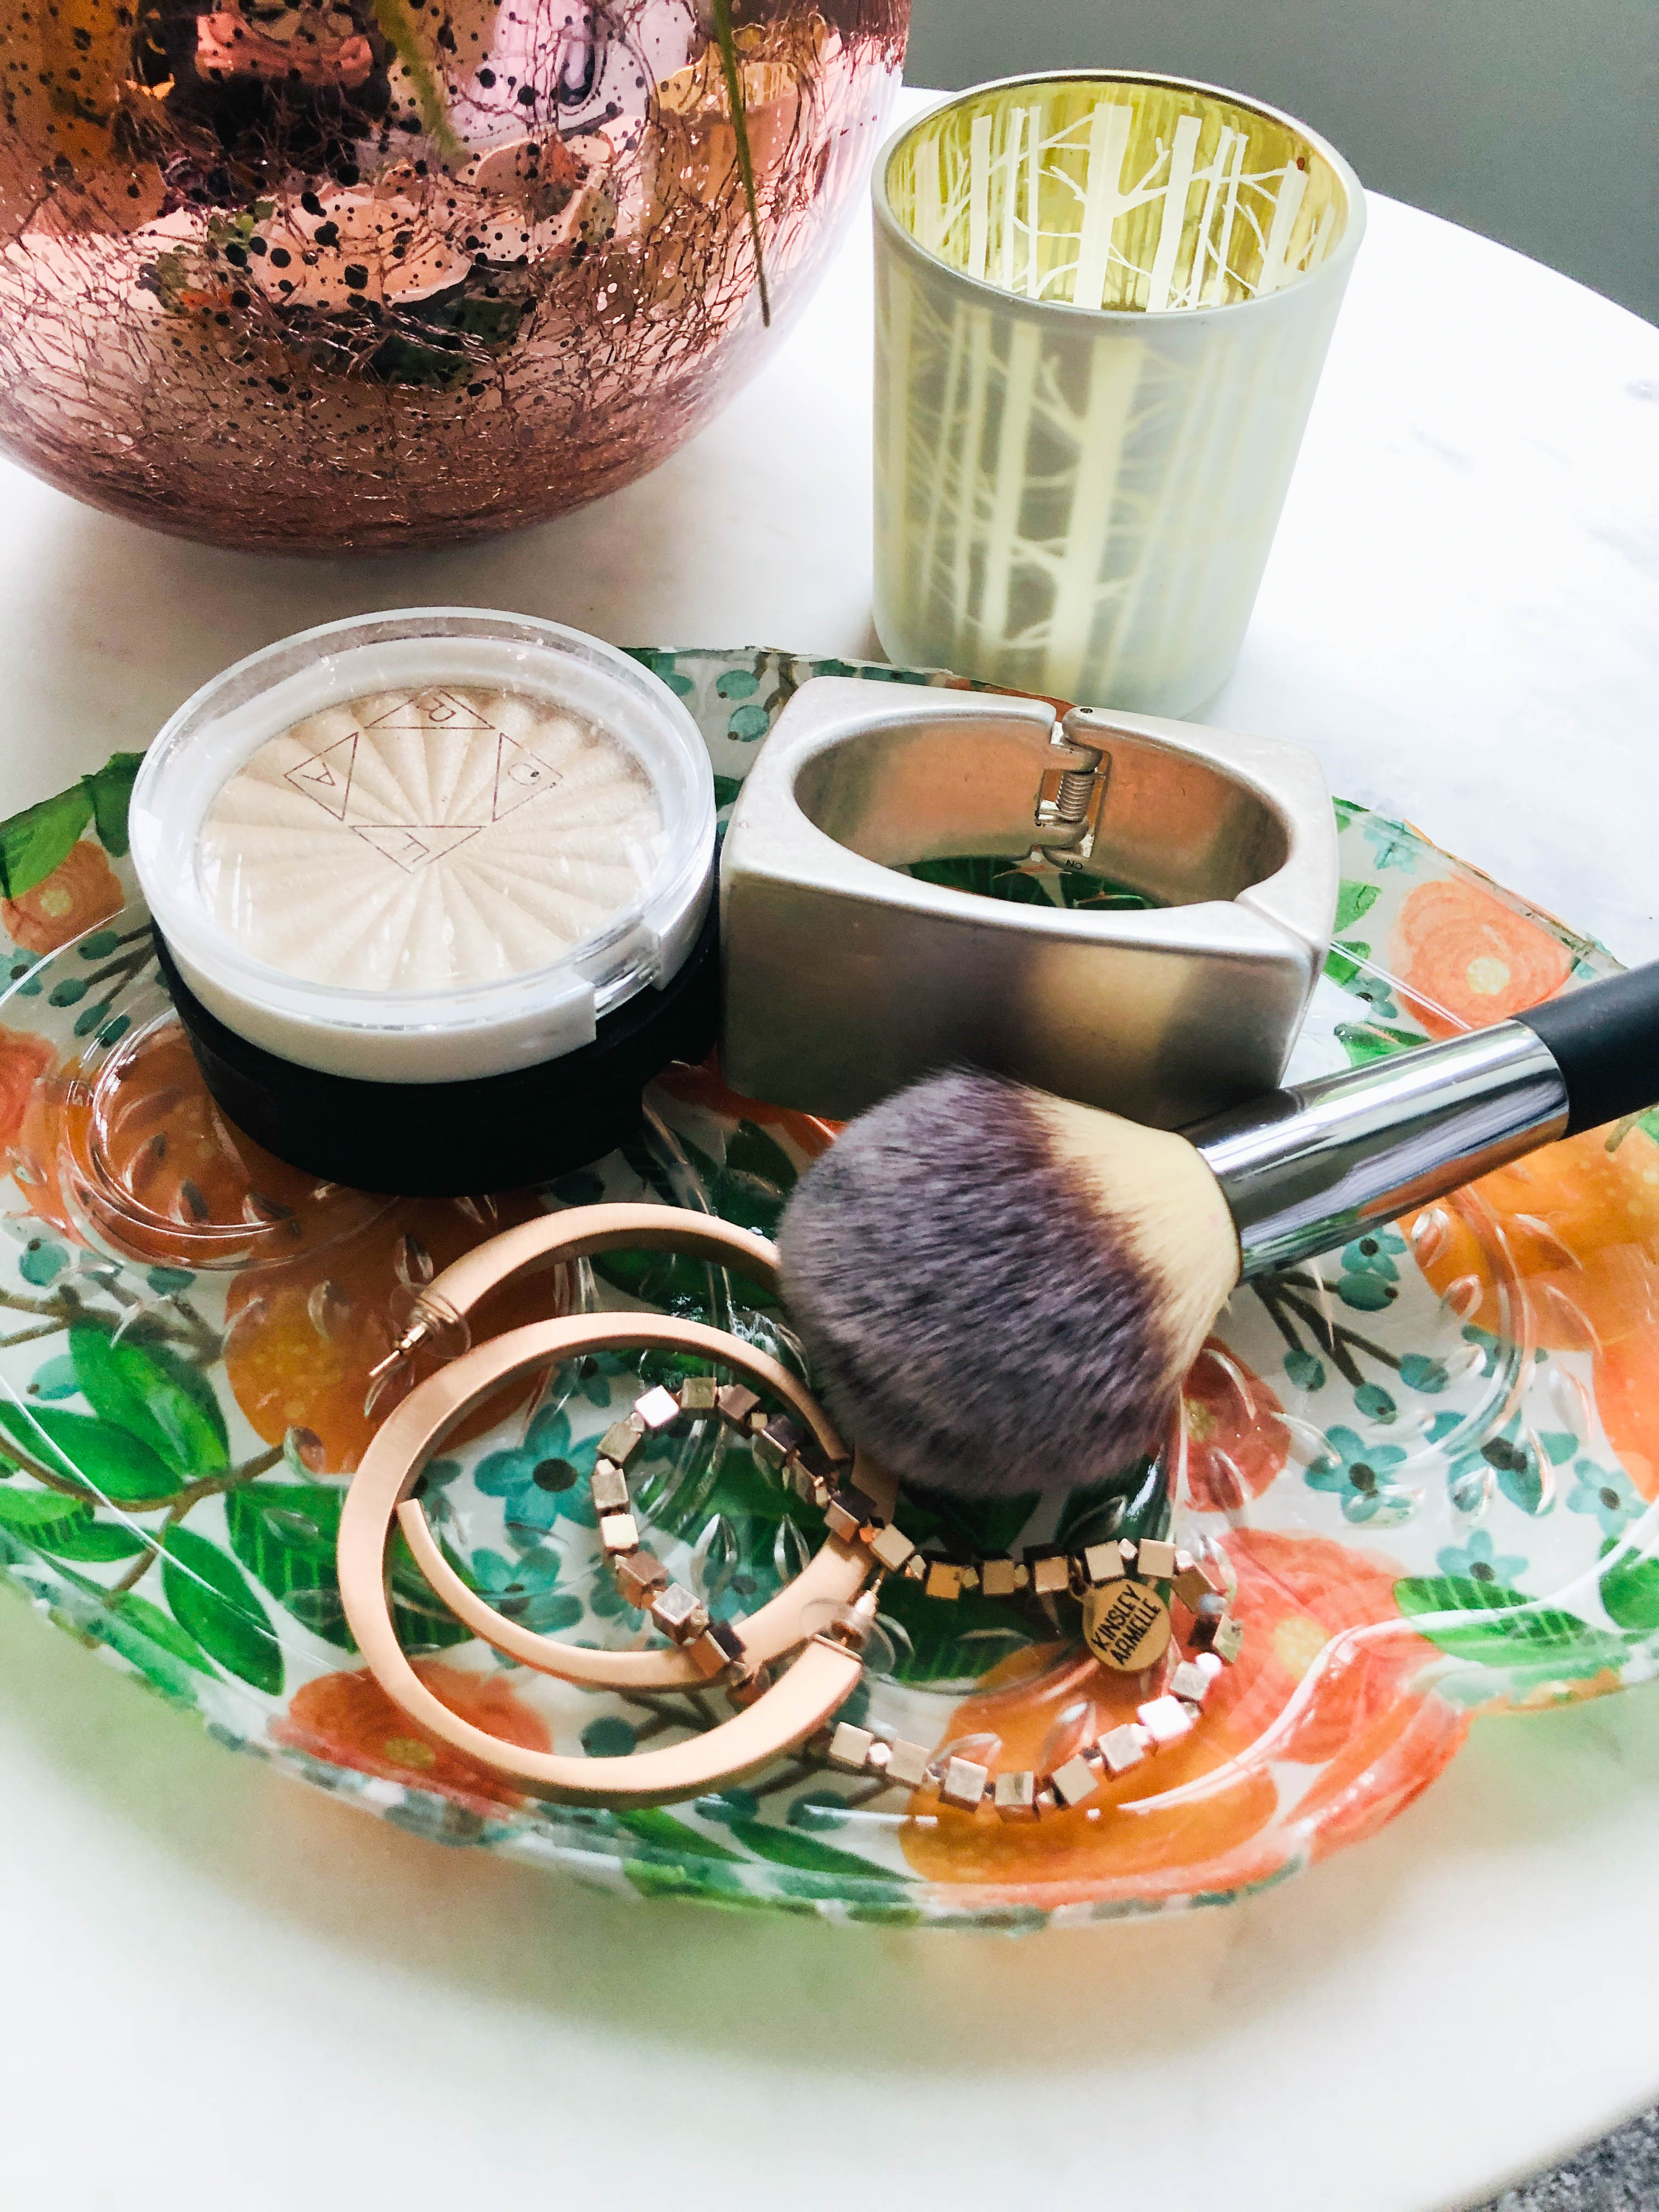 Jewelry and makeup brushes sitting on a completed glass snack plate.